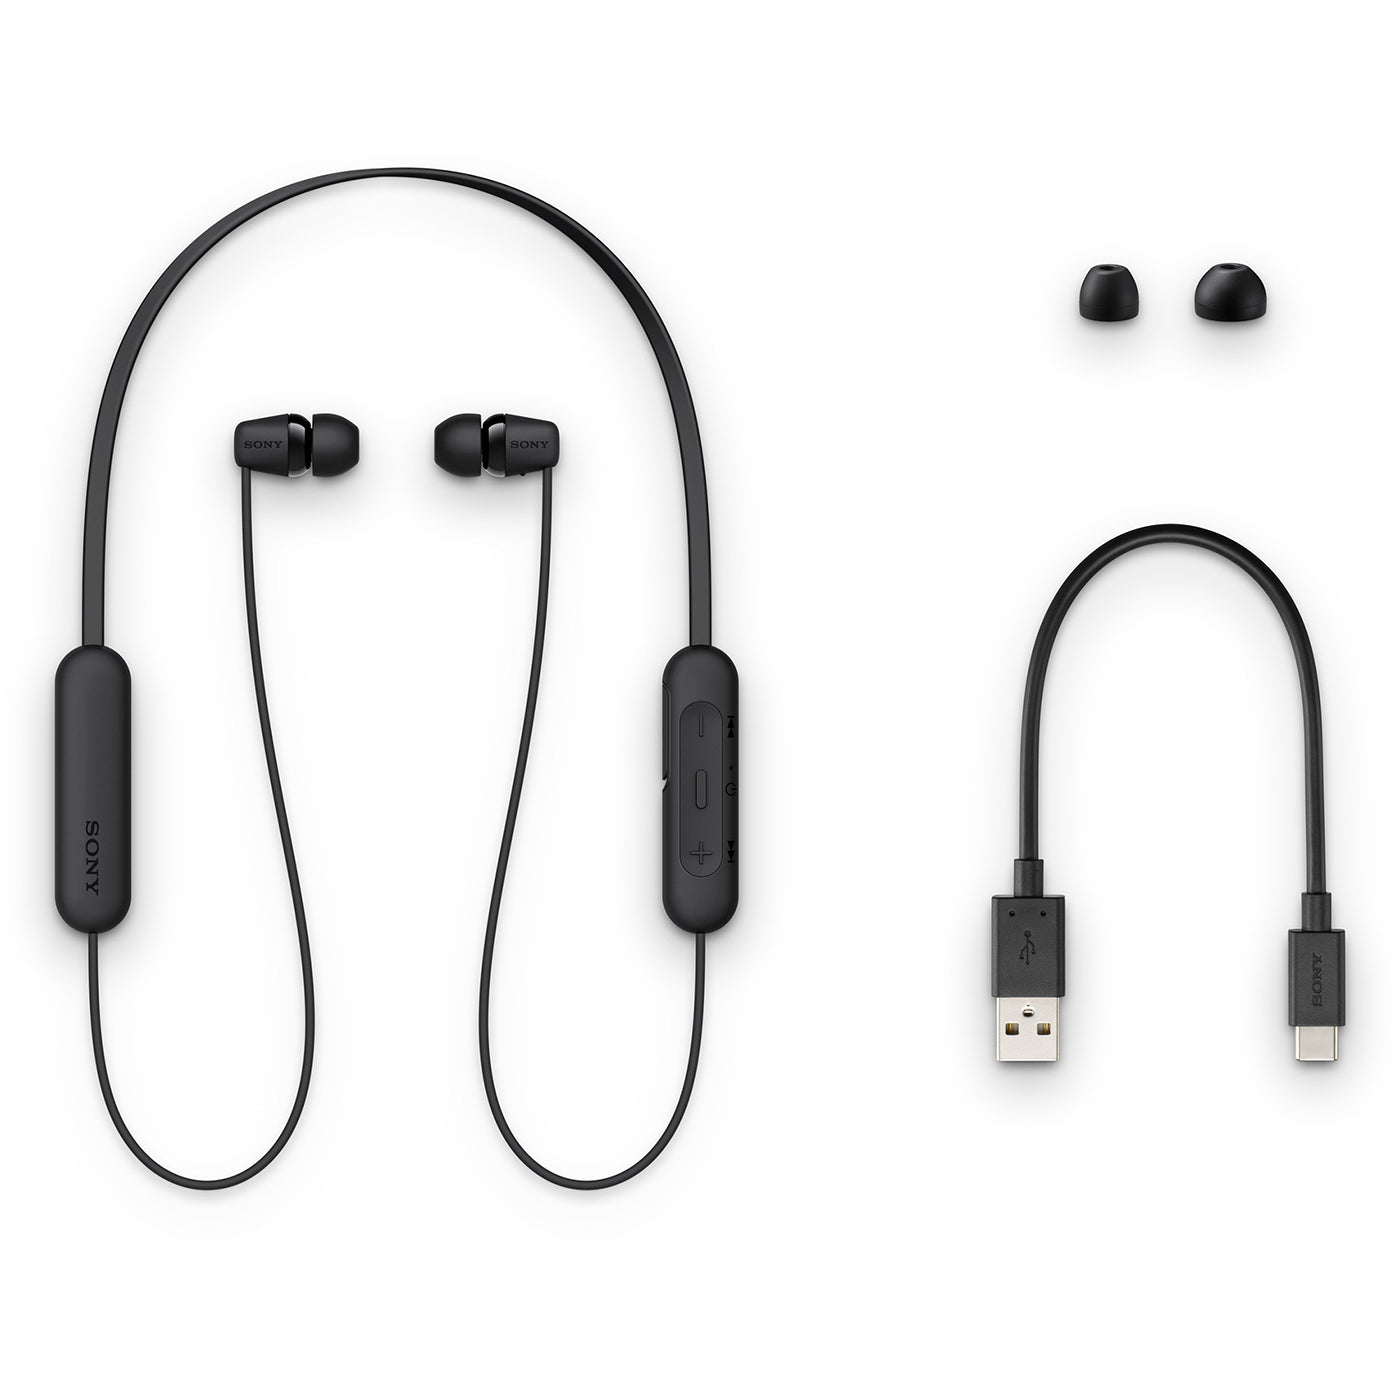 Sony WI-C200 Wireless Bluetooth in-Ear Headphones with Mic, 15 Hrs Battery Life, Quick Charge